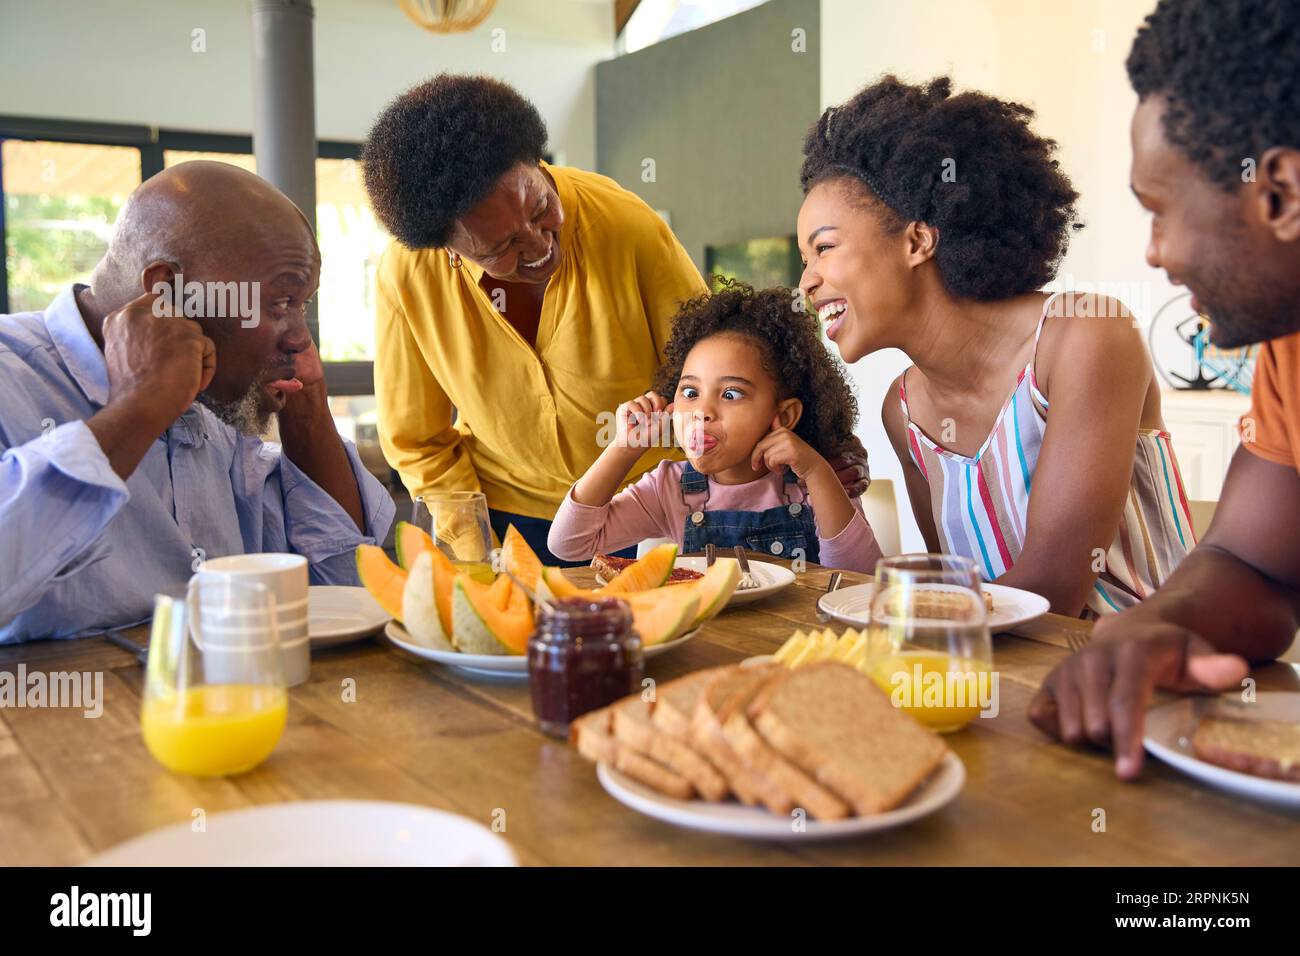 Family Shot With Grandparents Parents And Granddaughter Pulling Faces At Breakfast Around Table At Home Stock Photo